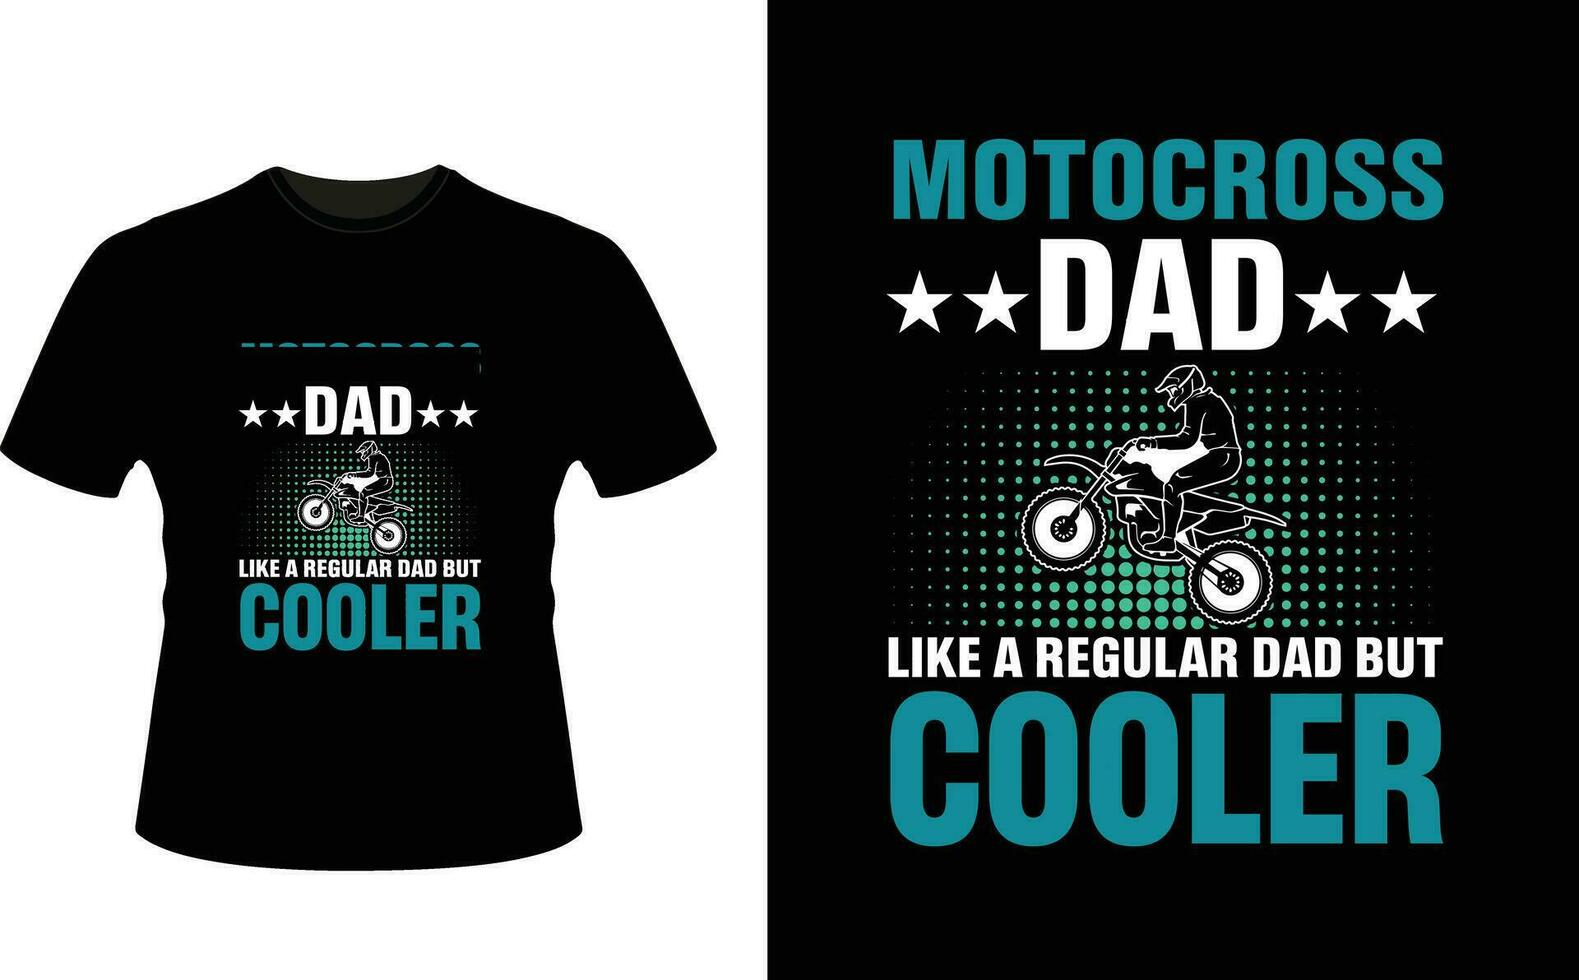 Motocross Dad Like a Regular Dad But Cooler or dad papa tshirt design or Father day t shirt Design vector